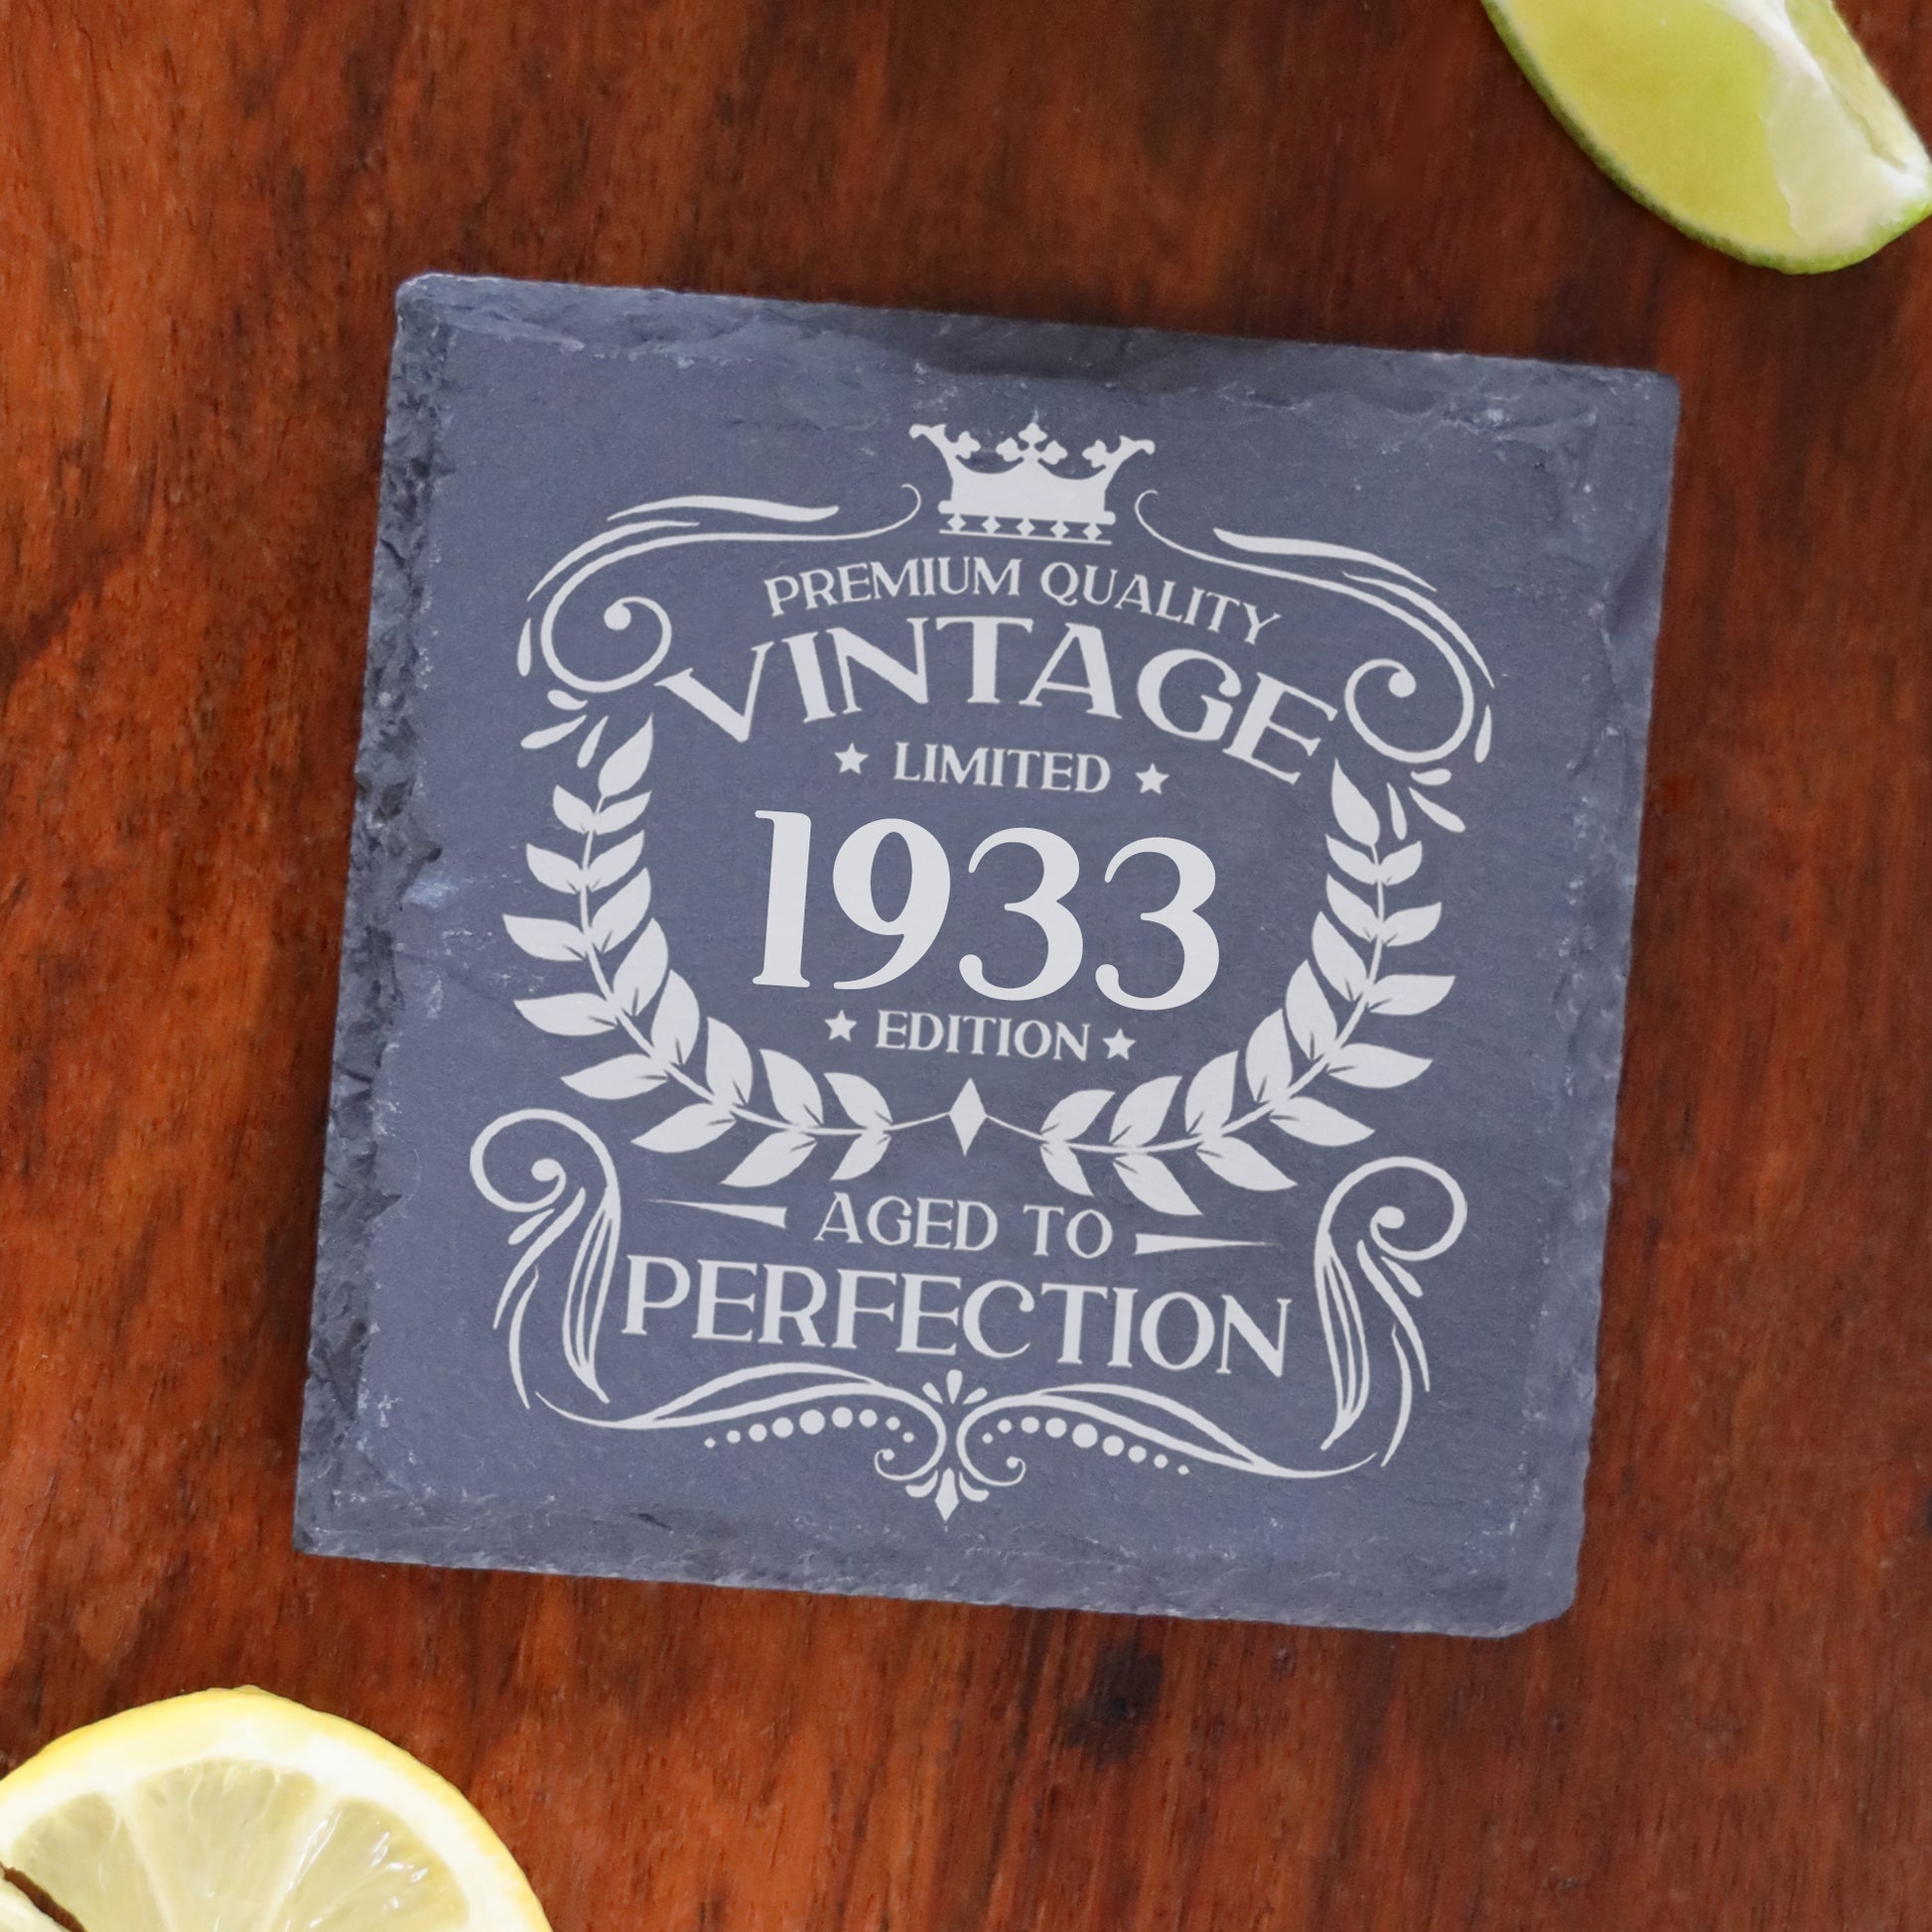 Personalised Vintage 1933 Mug and/or Coaster  - Always Looking Good - Square Coaster On Its Own  